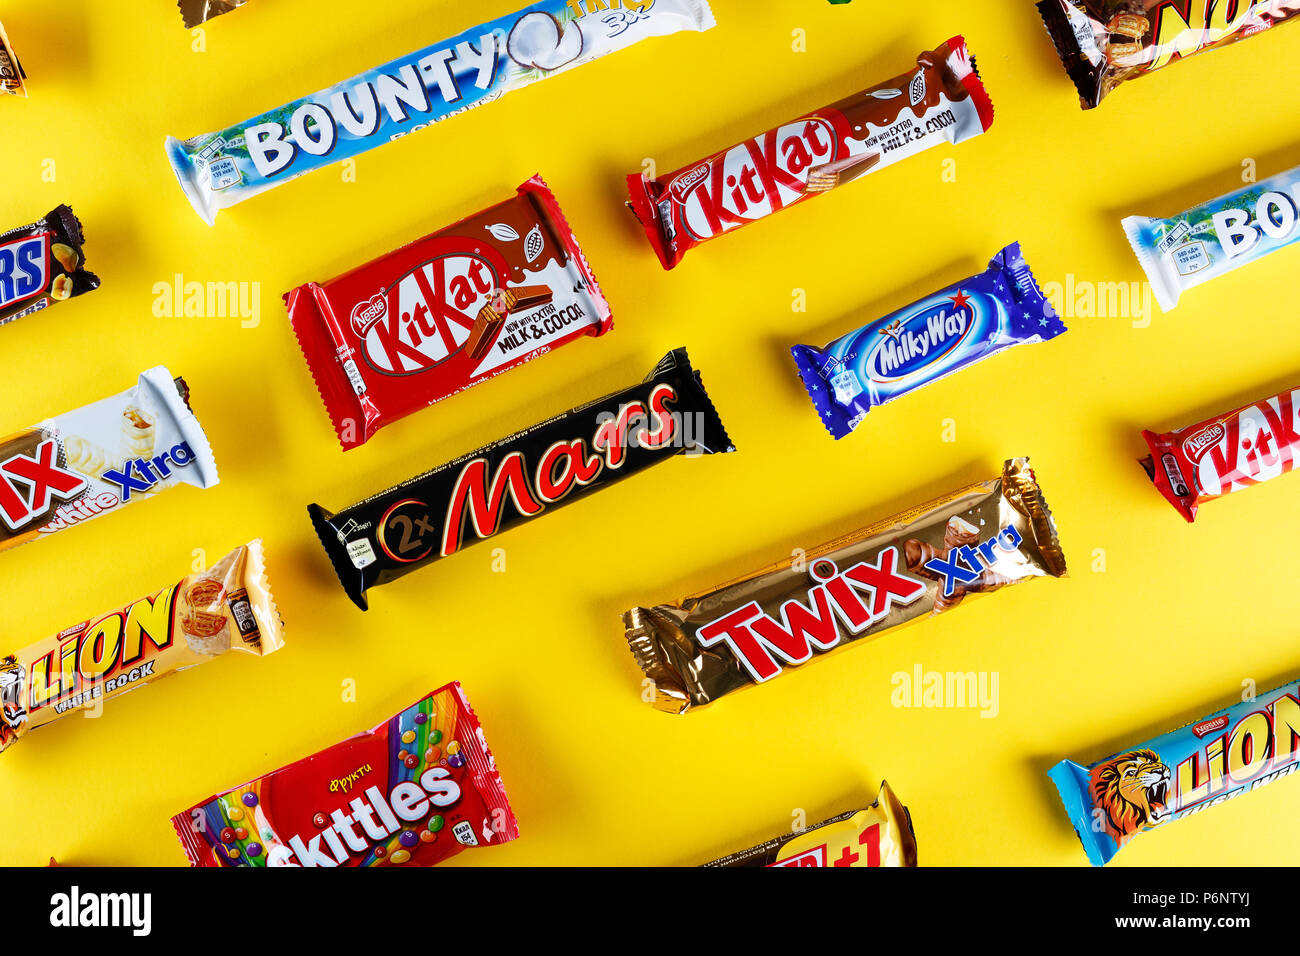 Kiev, Ukraine, March 29, 2018. different chocolate bars of modern companies. Chocolates lie in rows on a yellow background. Skittles - sweets, which a Stock Photo